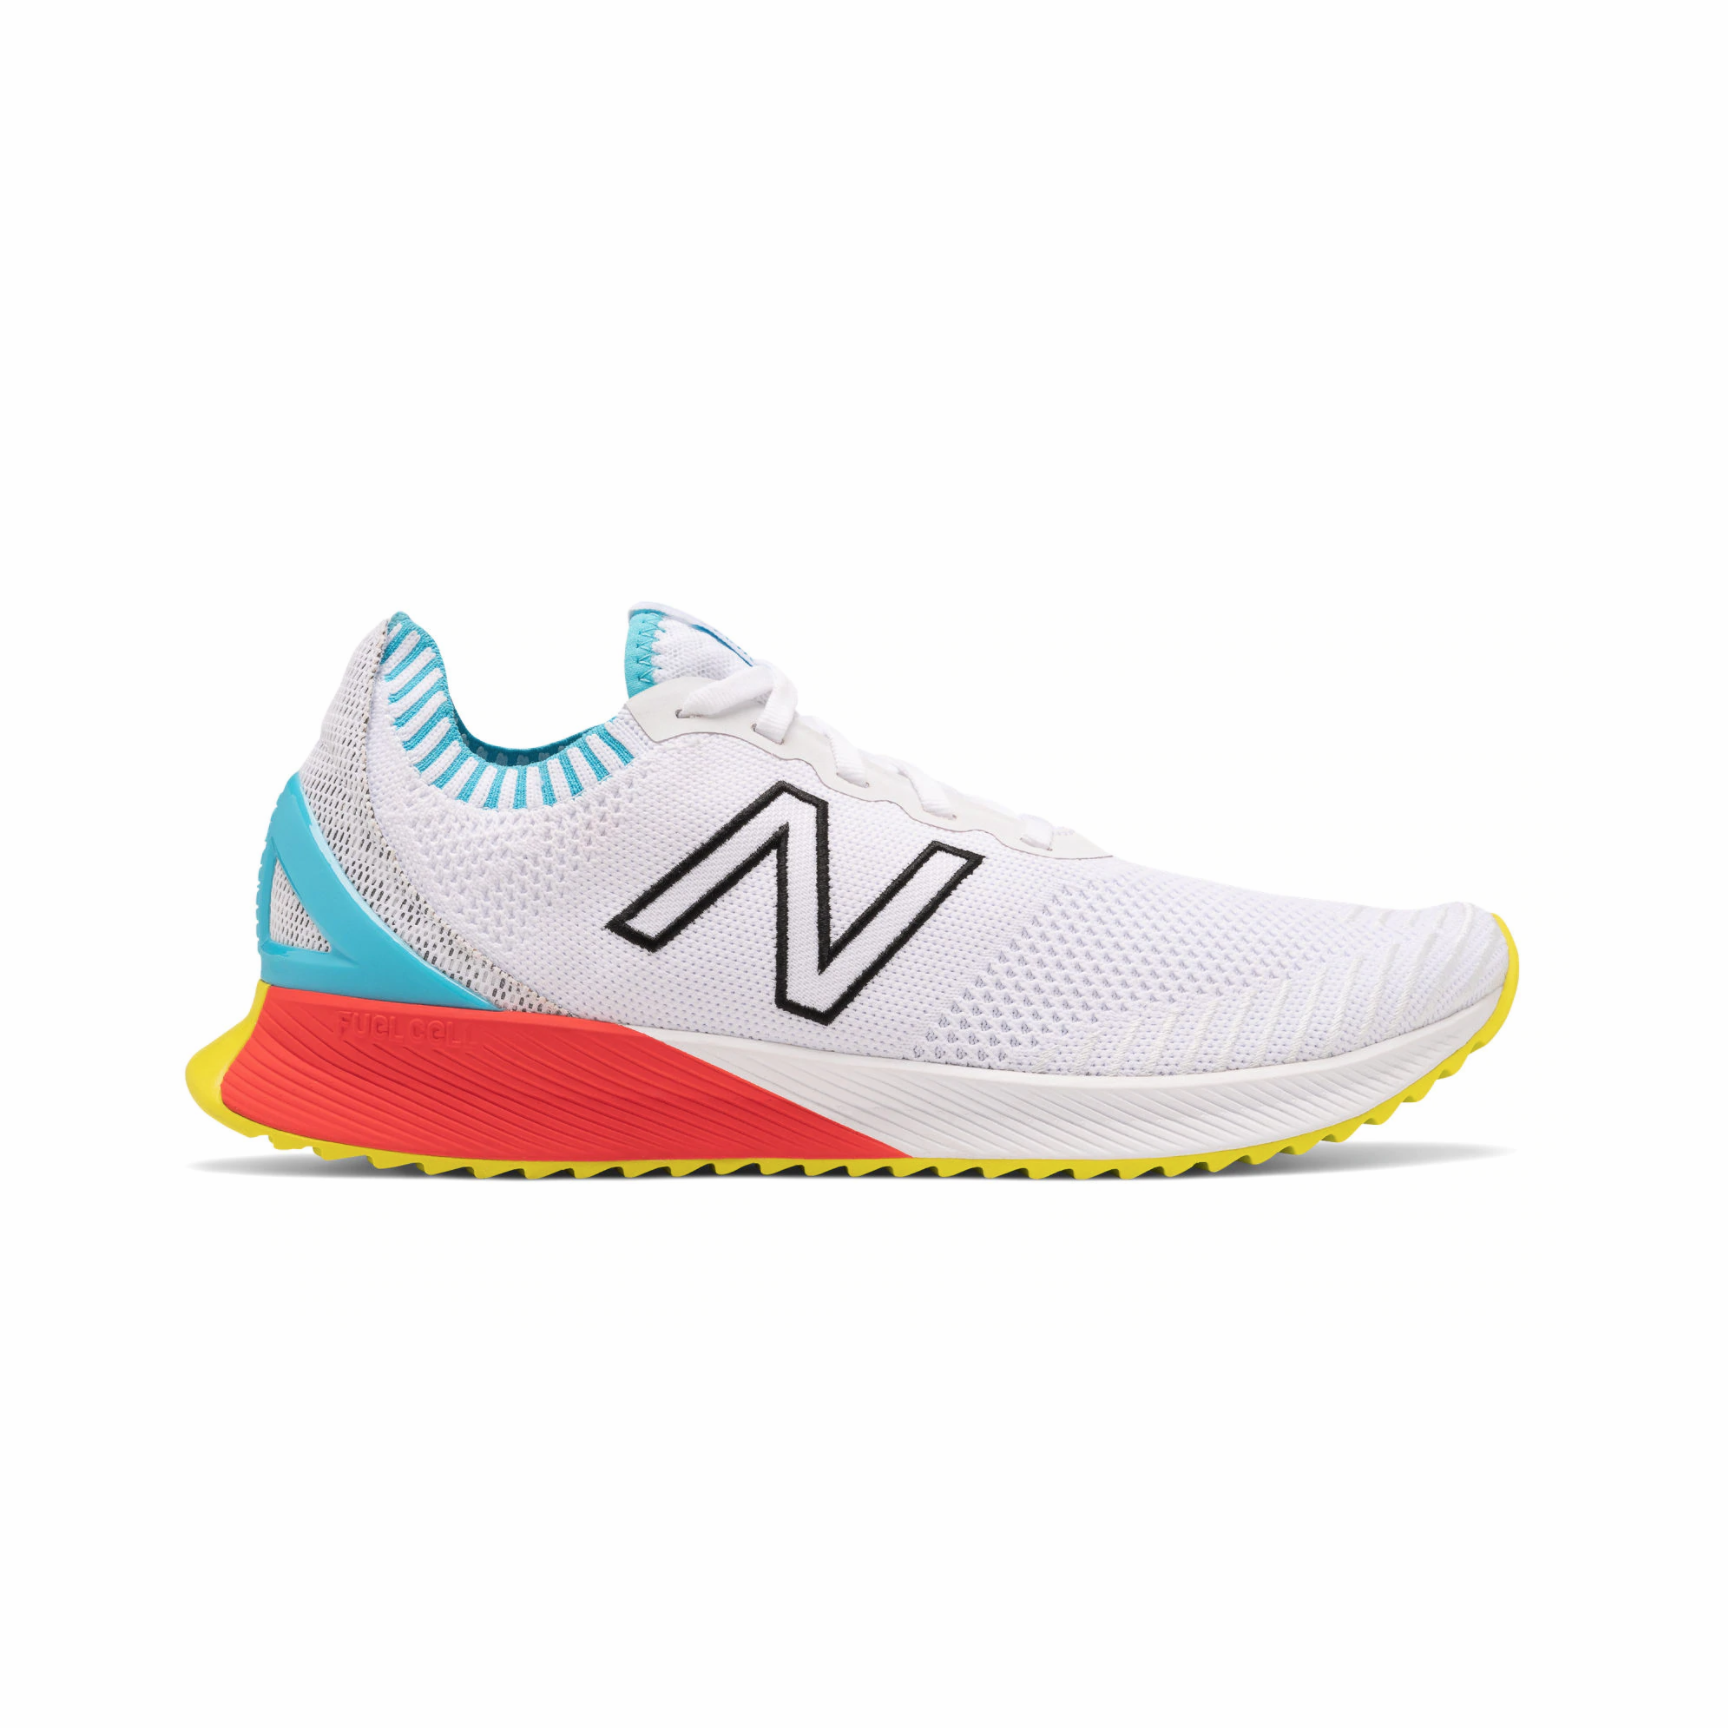 new balance running shoes mens sale